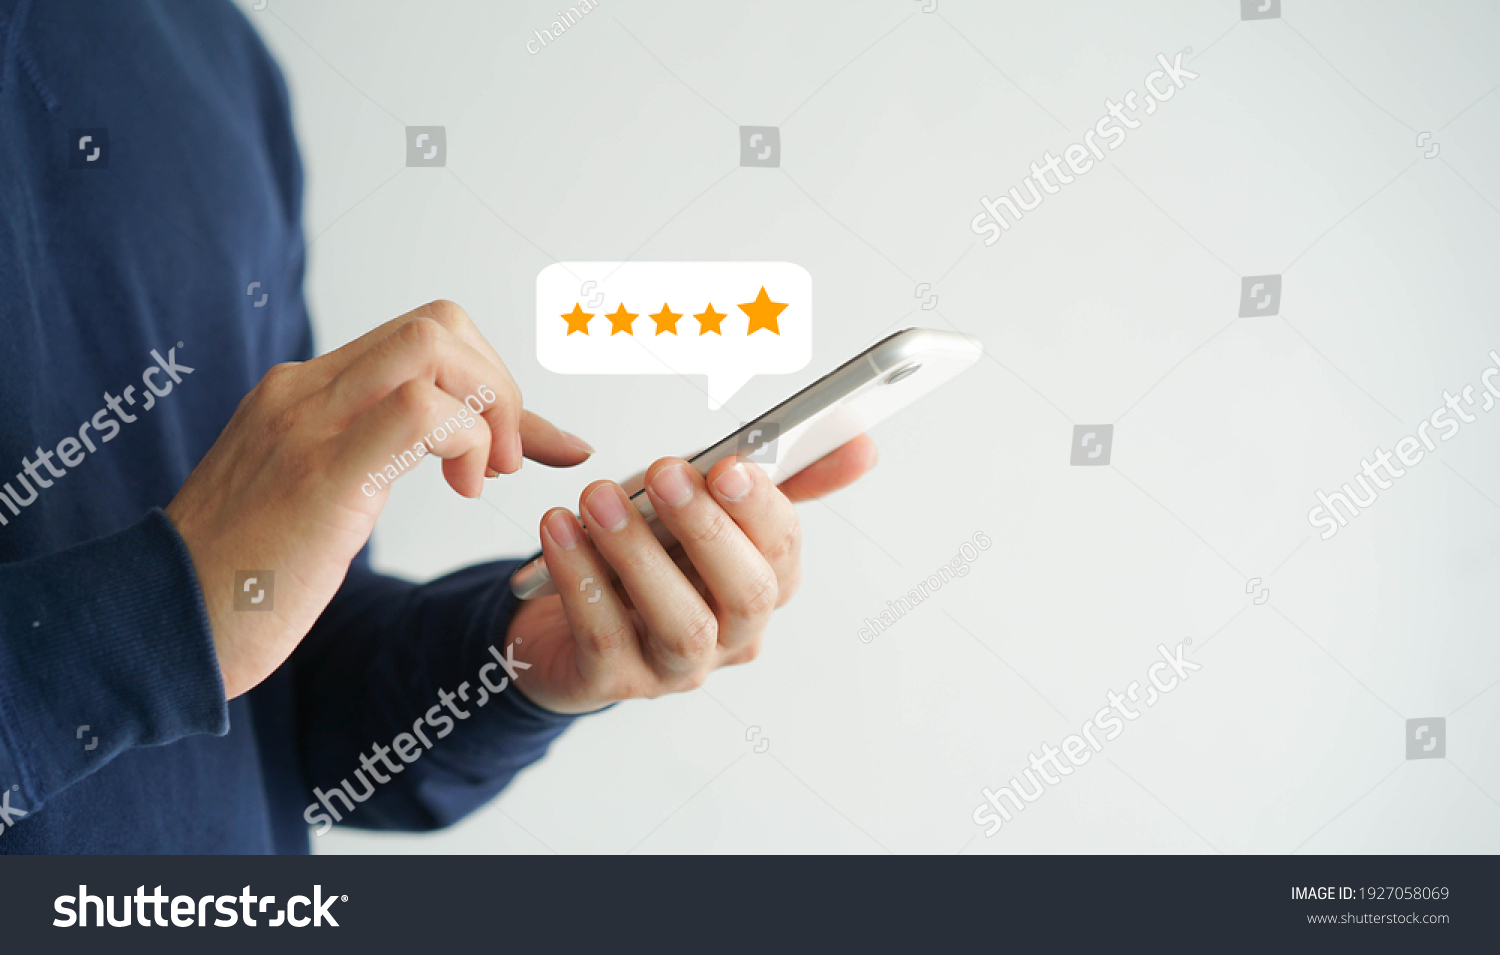 close up on customer man hand pressing on smartphone screen with gold five star rating feedback icon and press level excellent rank for giving best score point to review the service , business concept #1927058069